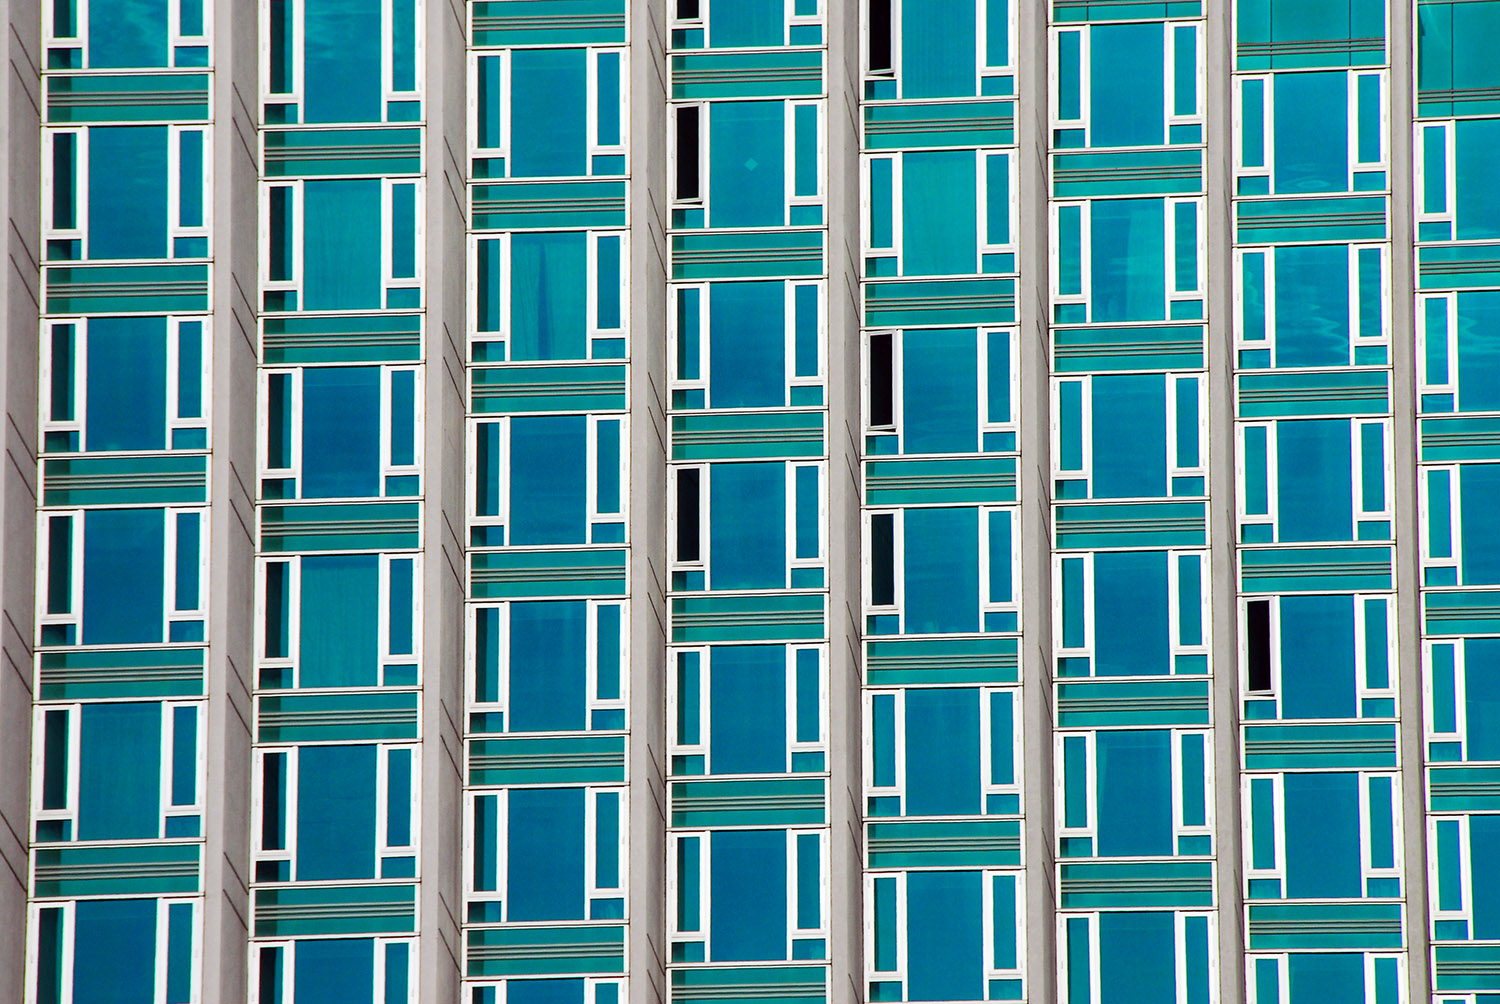 Architecture_Building_Patterns_Turquoise_New_York_City_Travel.jpg